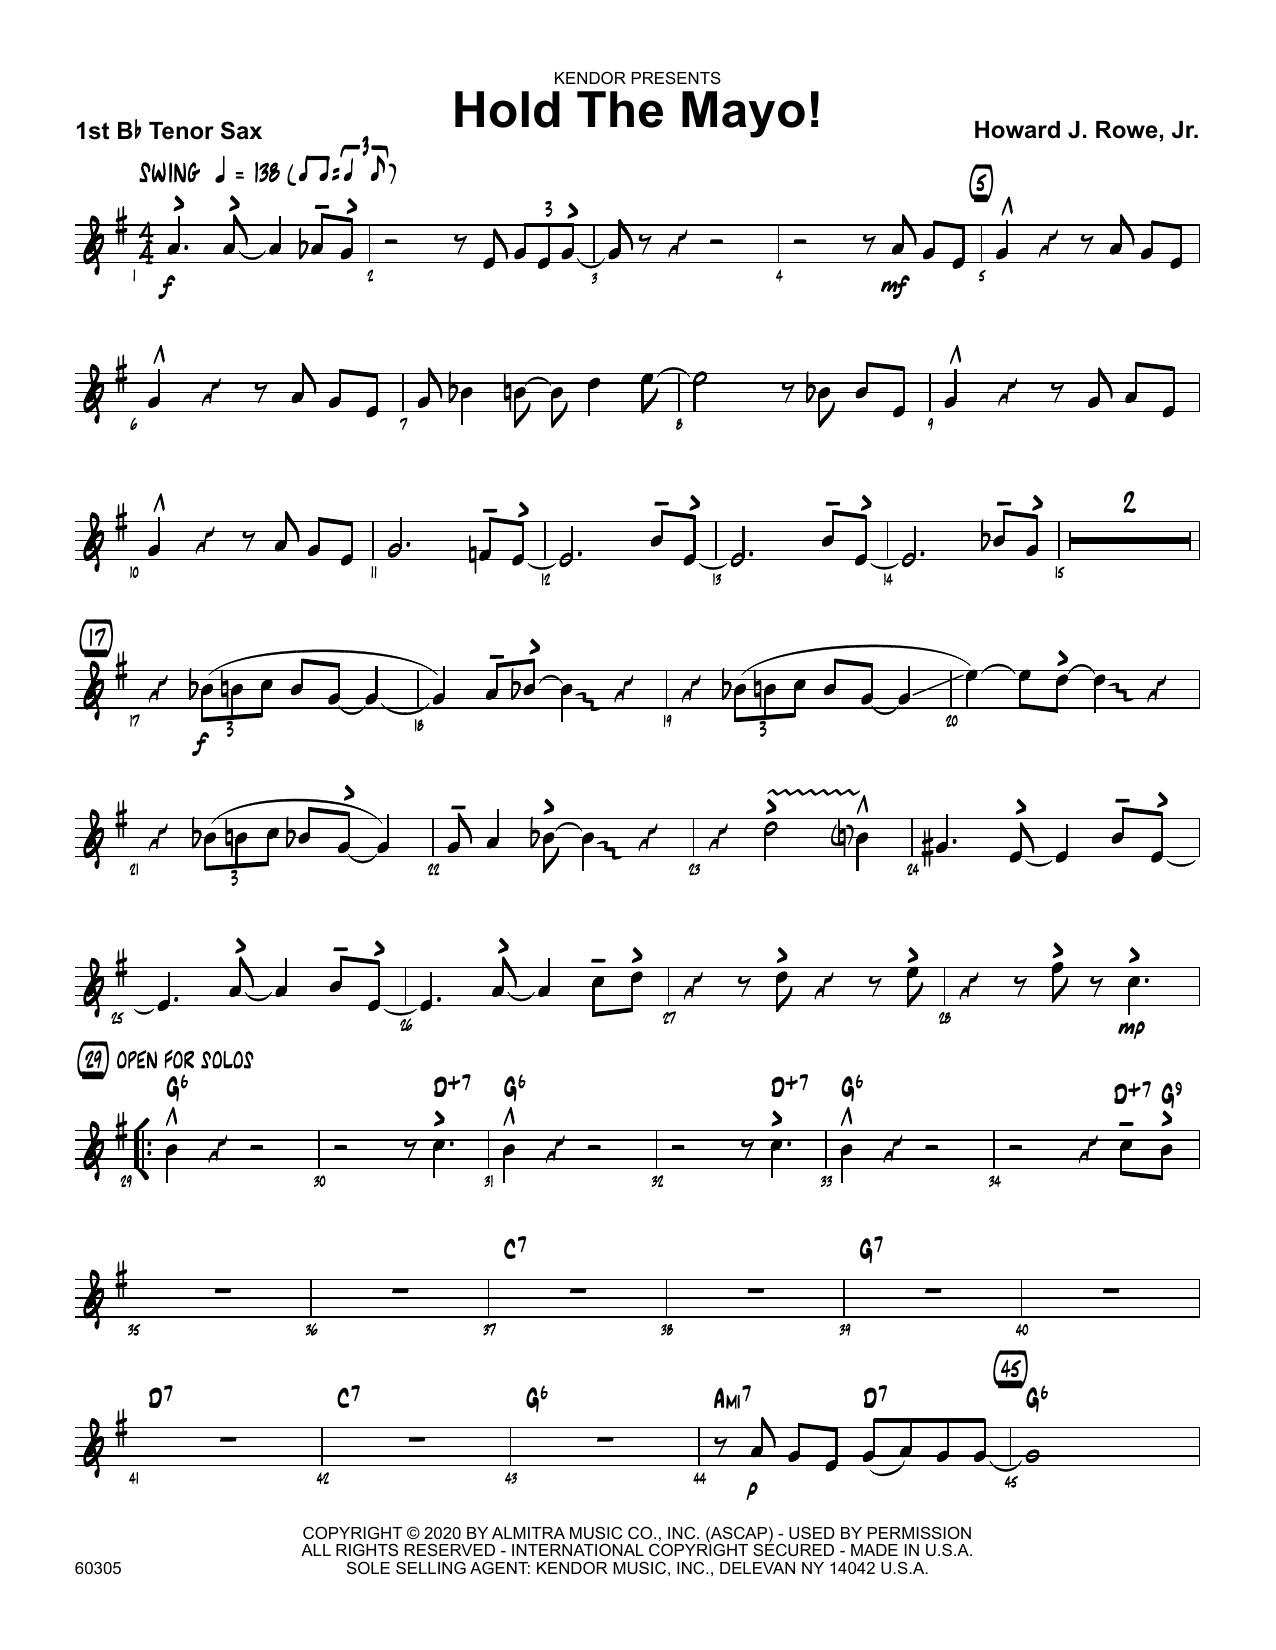 Download Howard Rowe Hold The Mayo! - 1st Tenor Saxophone Sheet Music